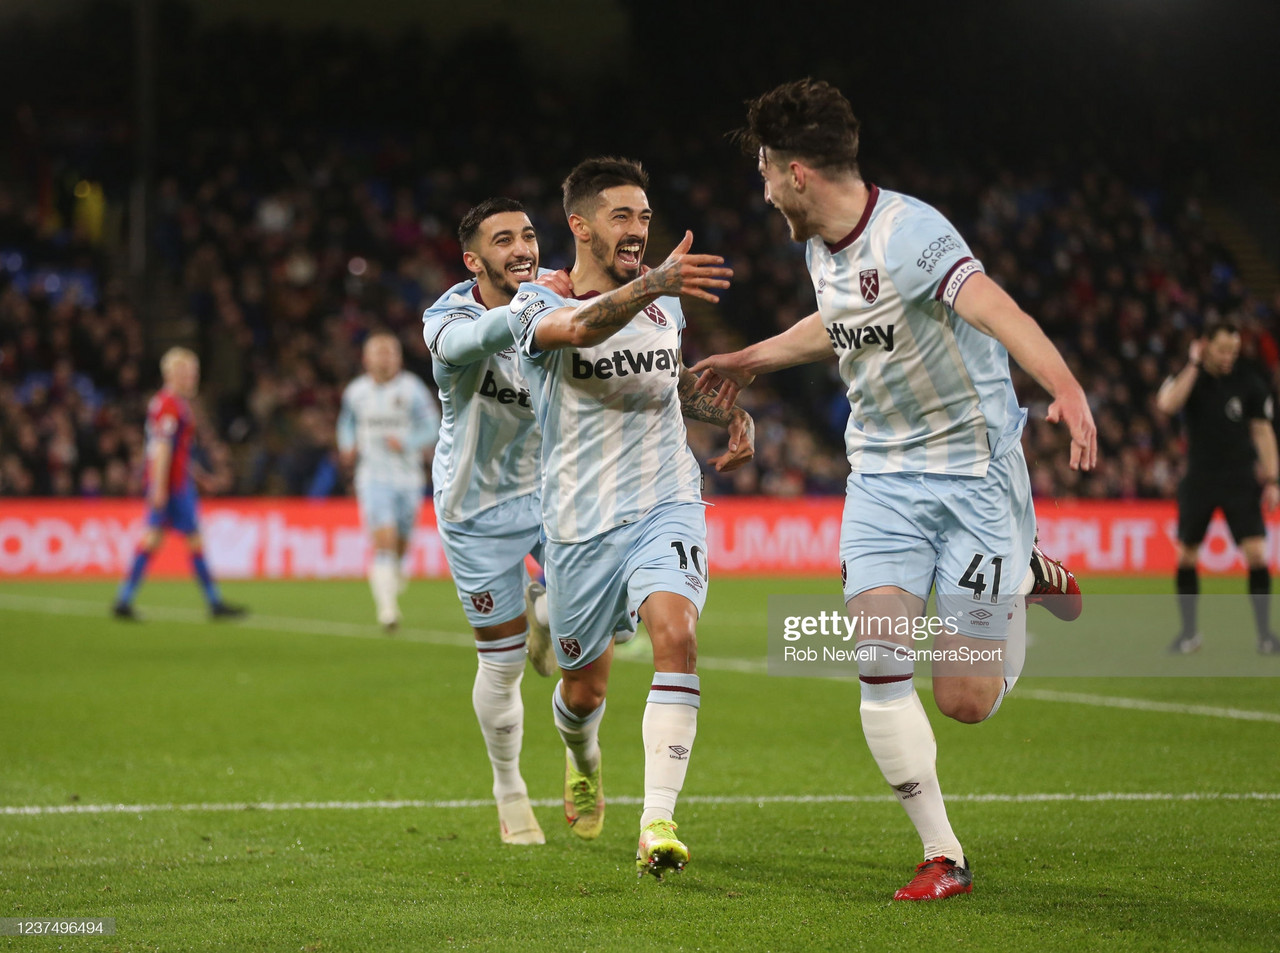 Crystal Palace 2-3 West Ham United: Hammers hang on to deny Eagles improbable point